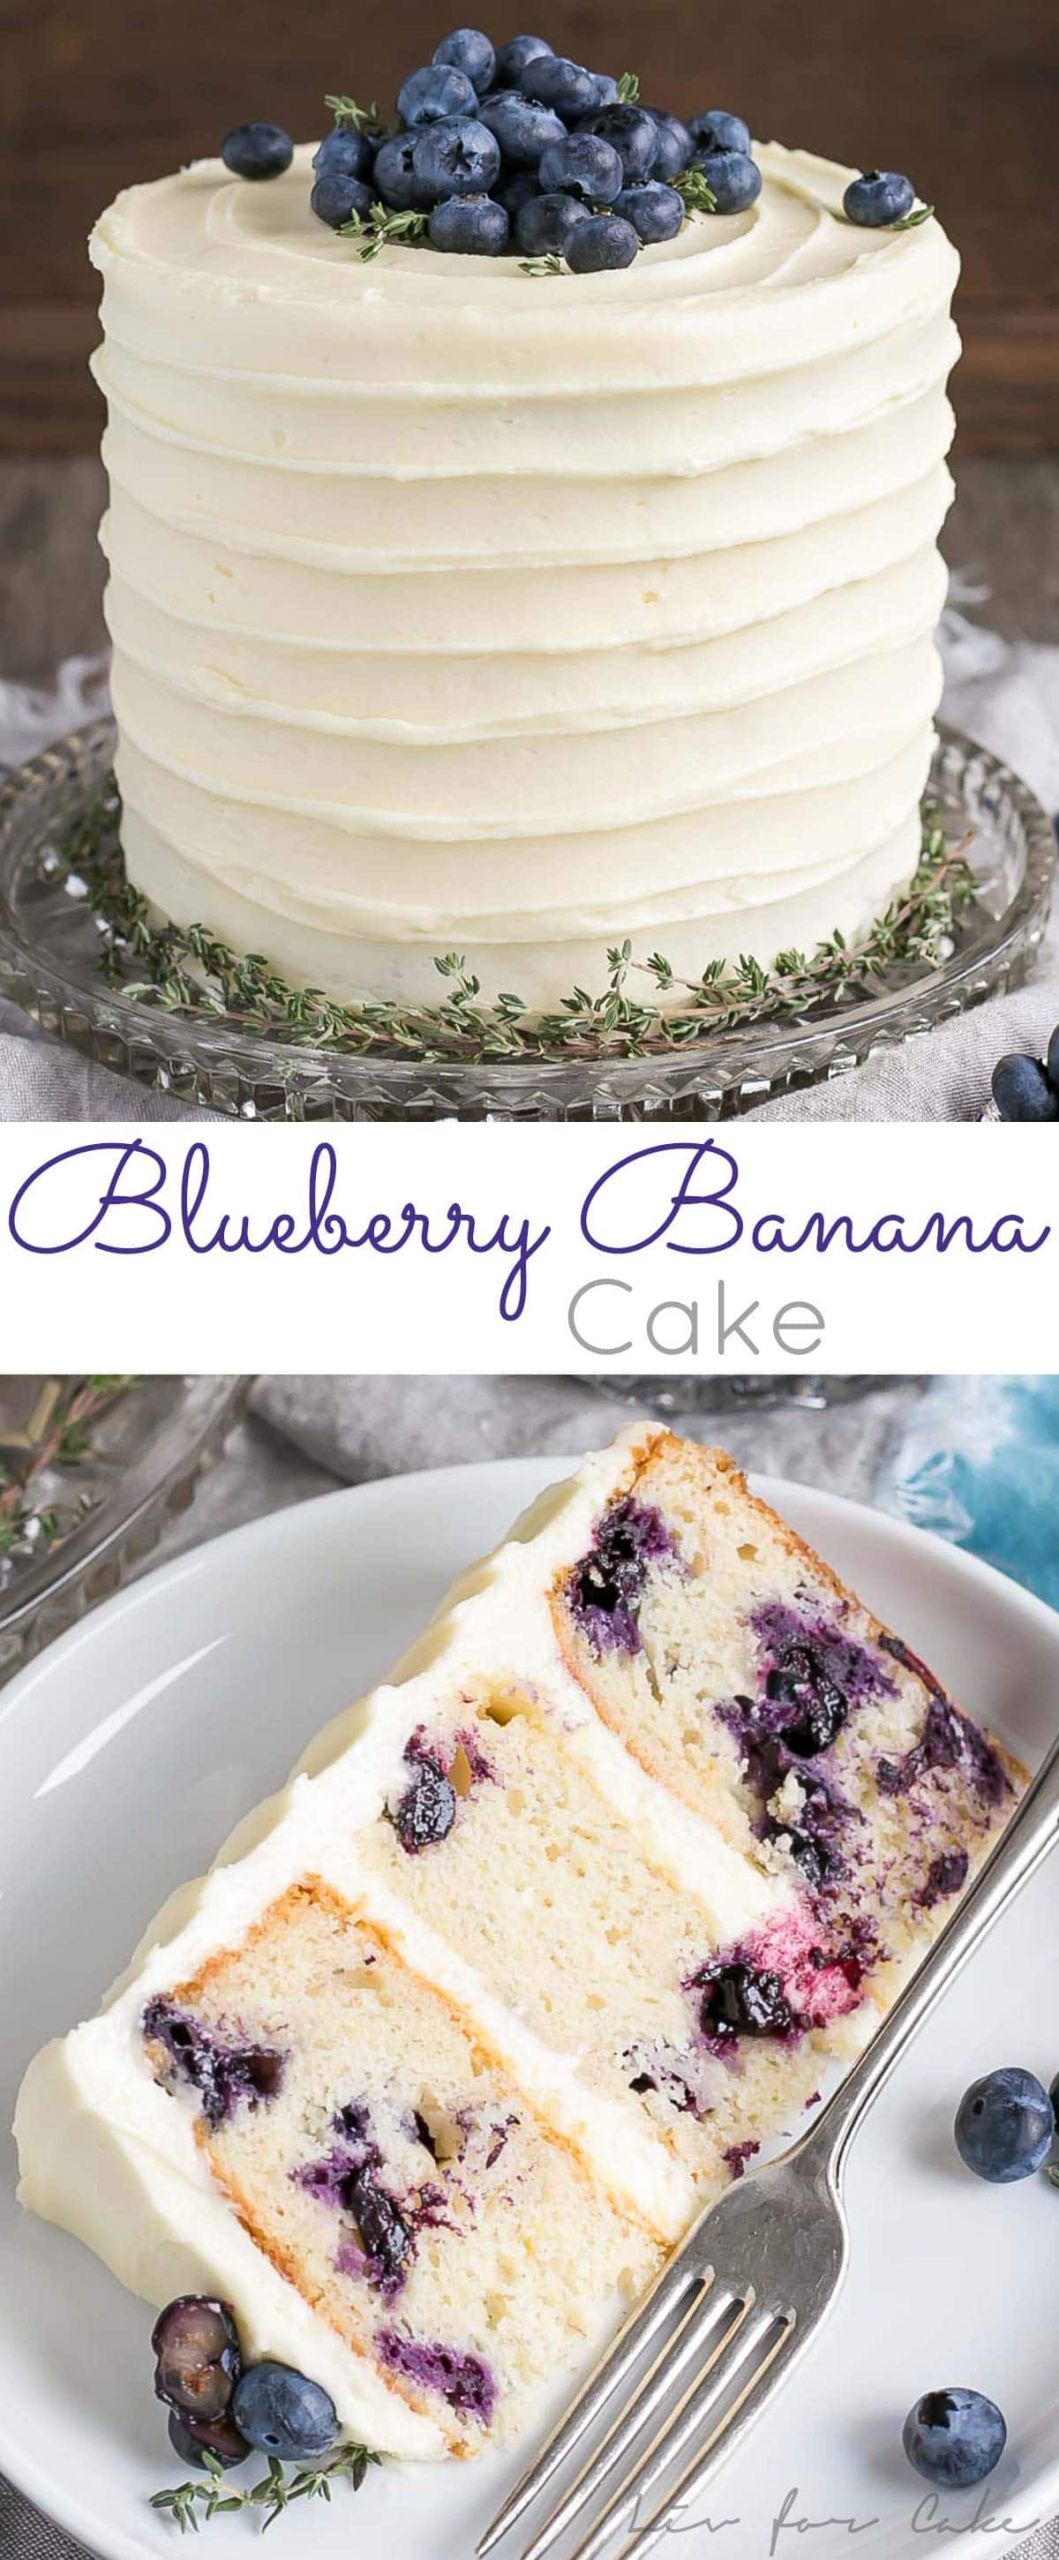 Blueberry Birthday Cake Recipes
 Blueberry Banana Cake with Cream Cheese Frosting